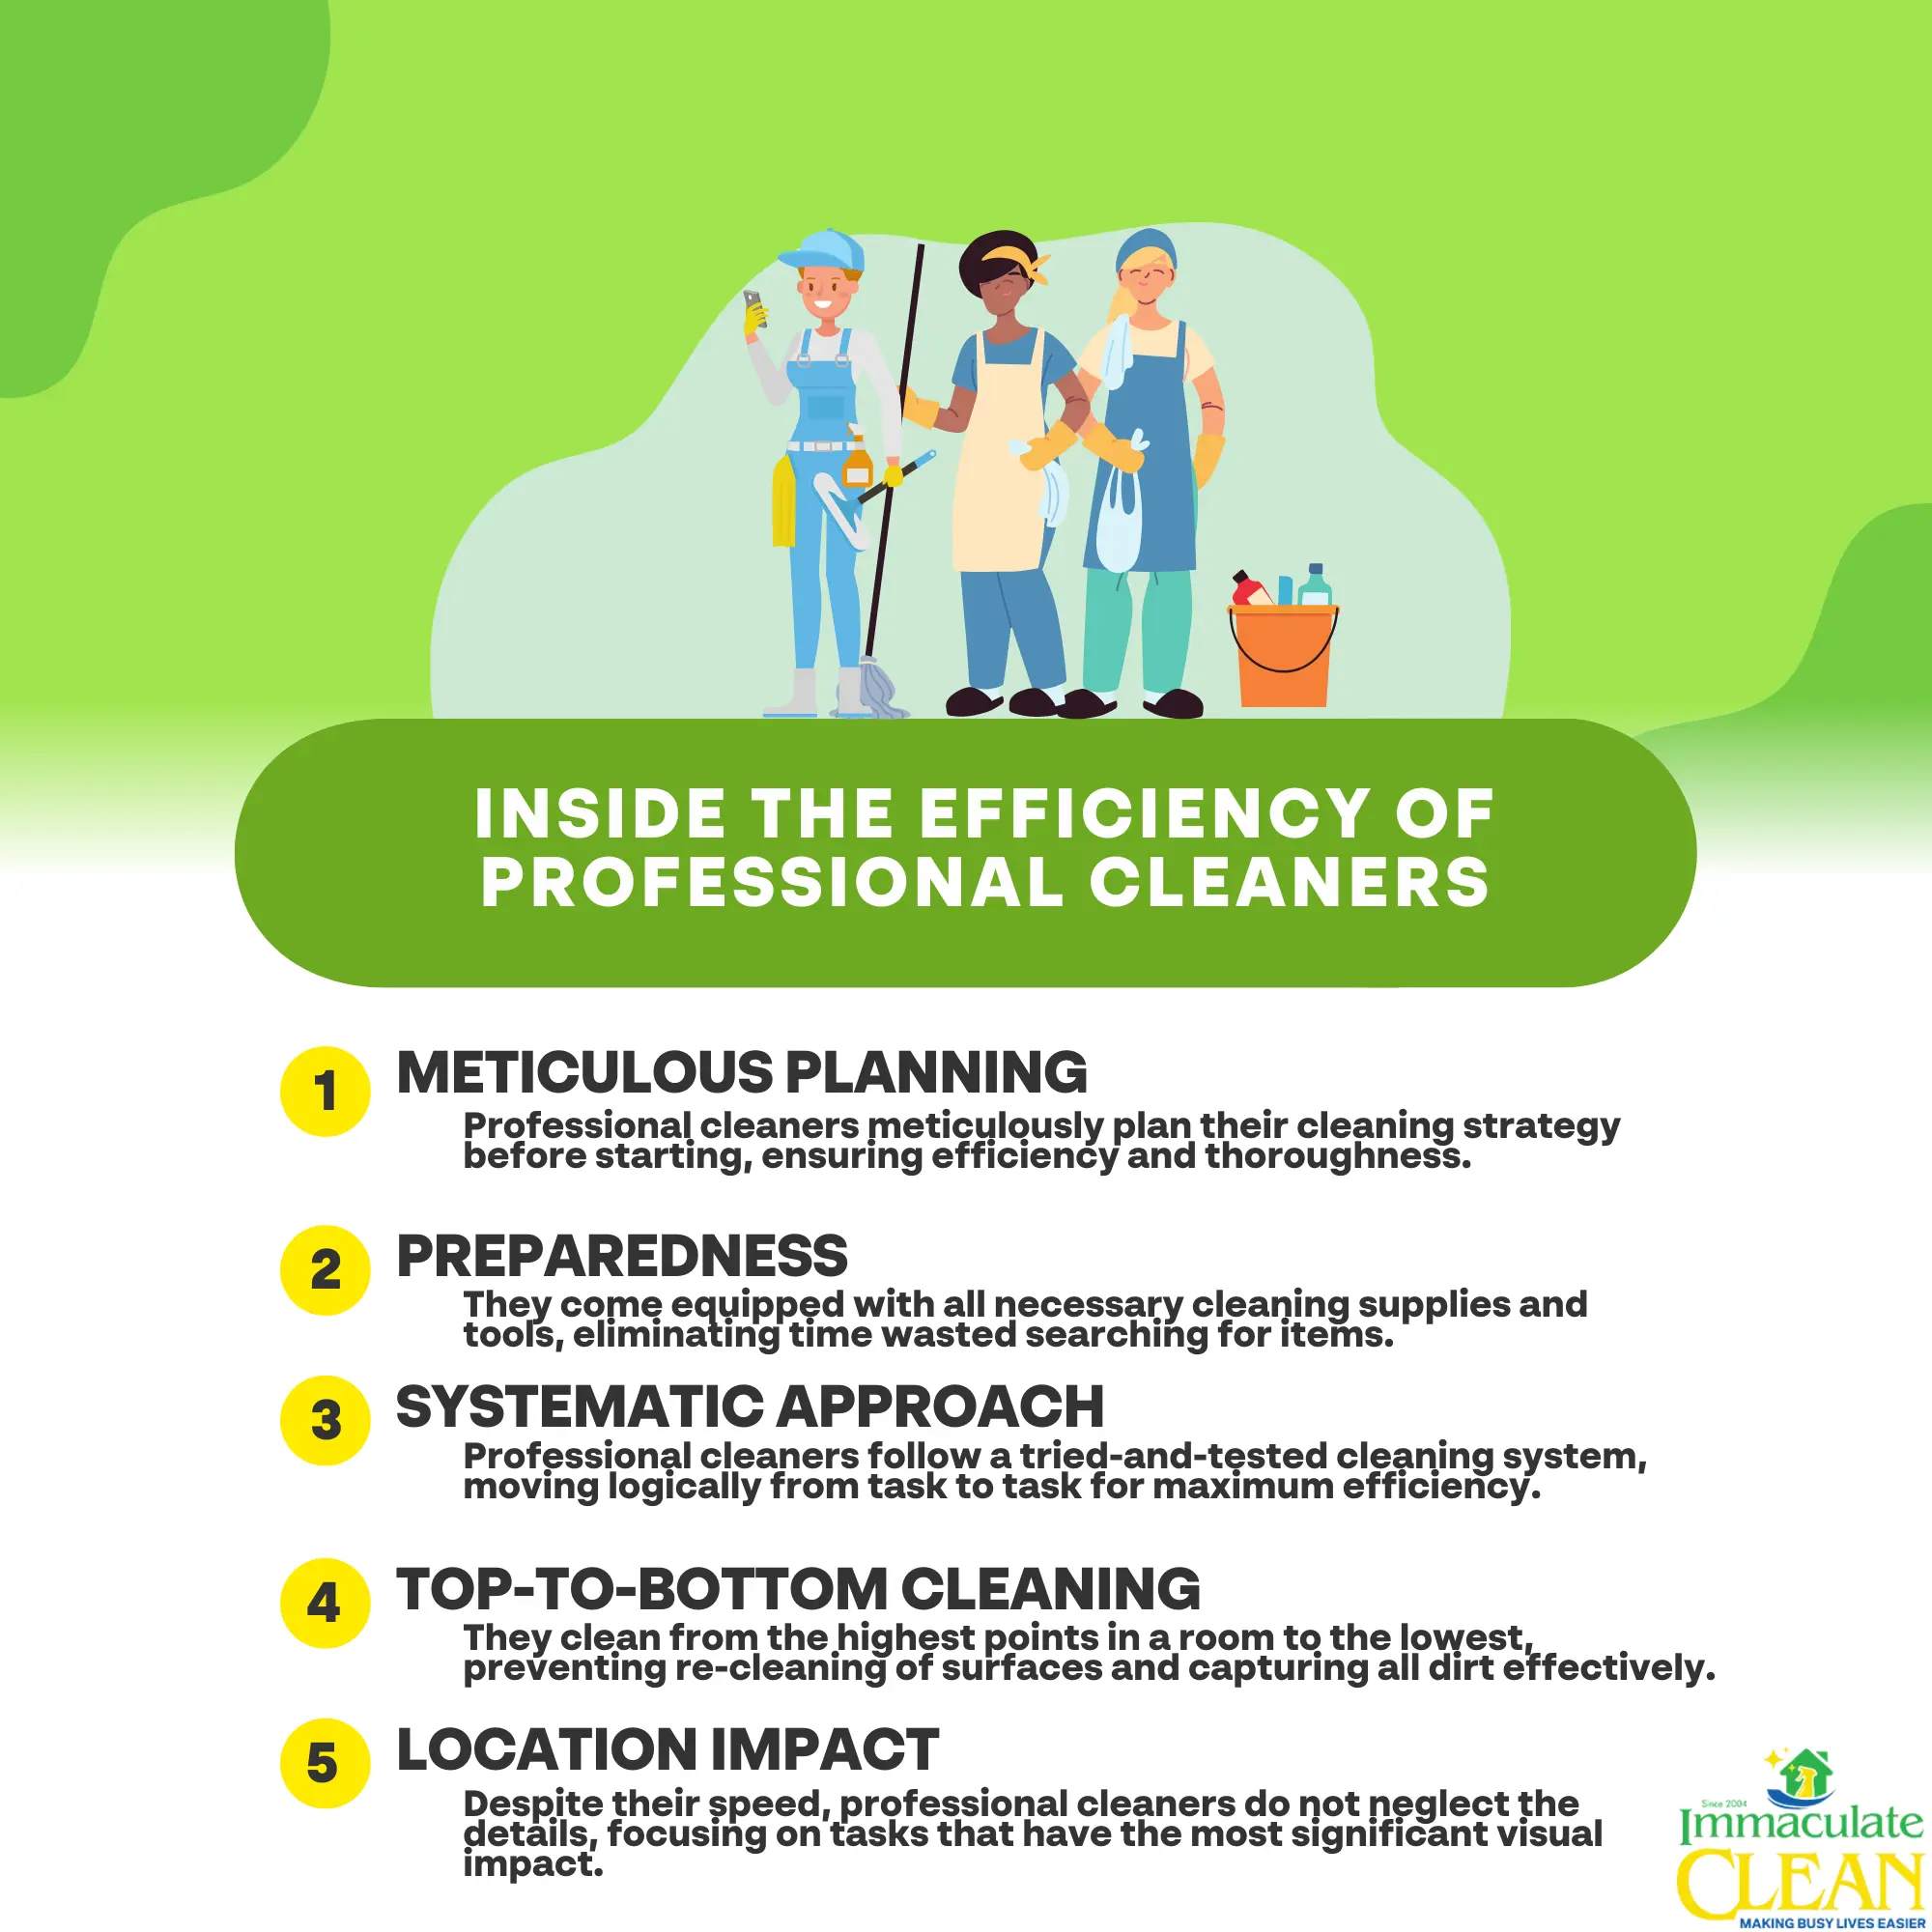 Inside the Efficiency of Professional Cleaners